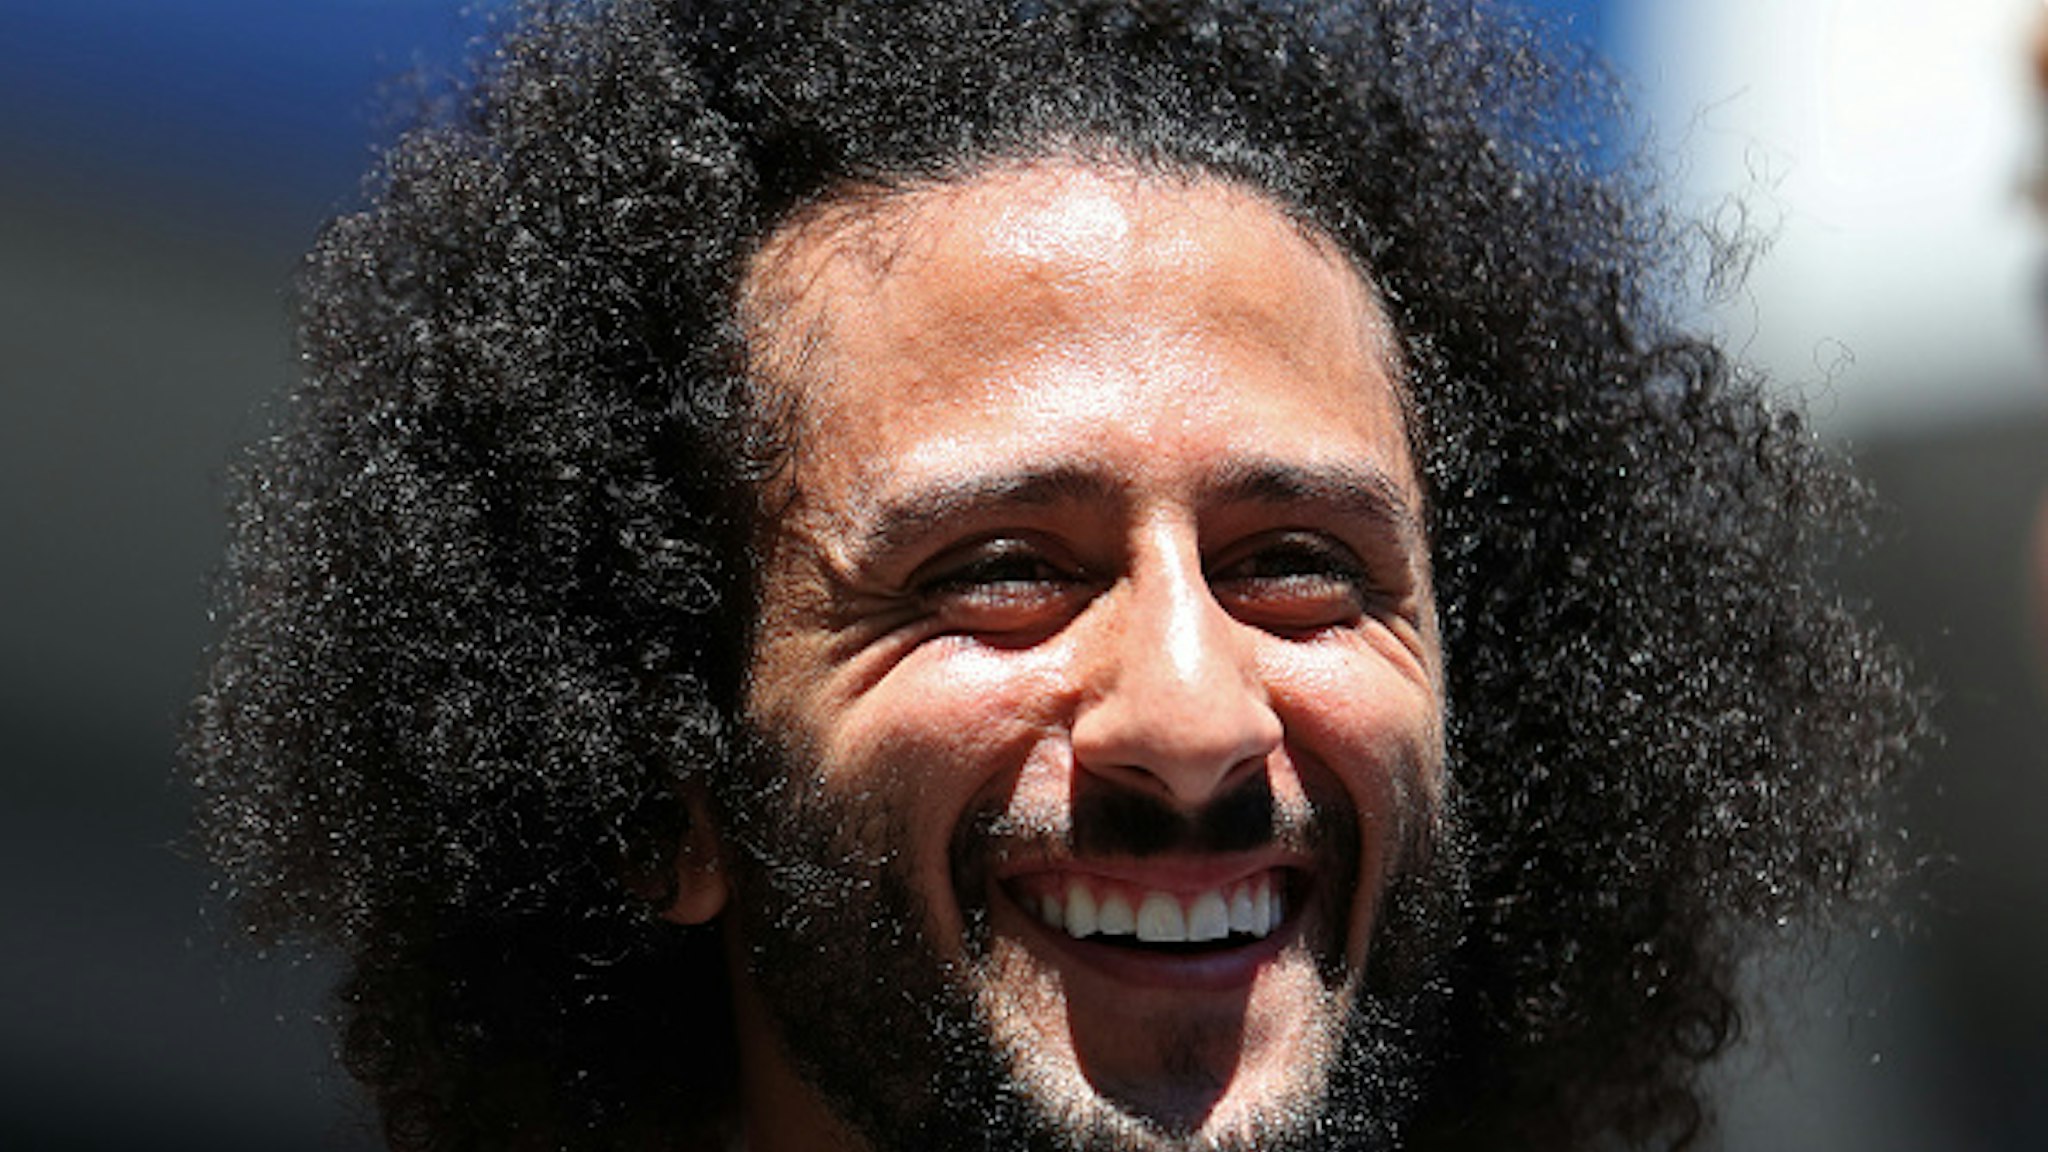 Former San Francisco 49er Colin Kaepernick watches a Women's Singles second round match between Naomi Osaka of Japan and Magda Linette of Poland on day four of the 2019 US Open at the USTA Billie Jean King National Tennis Center on August 29, 2019.